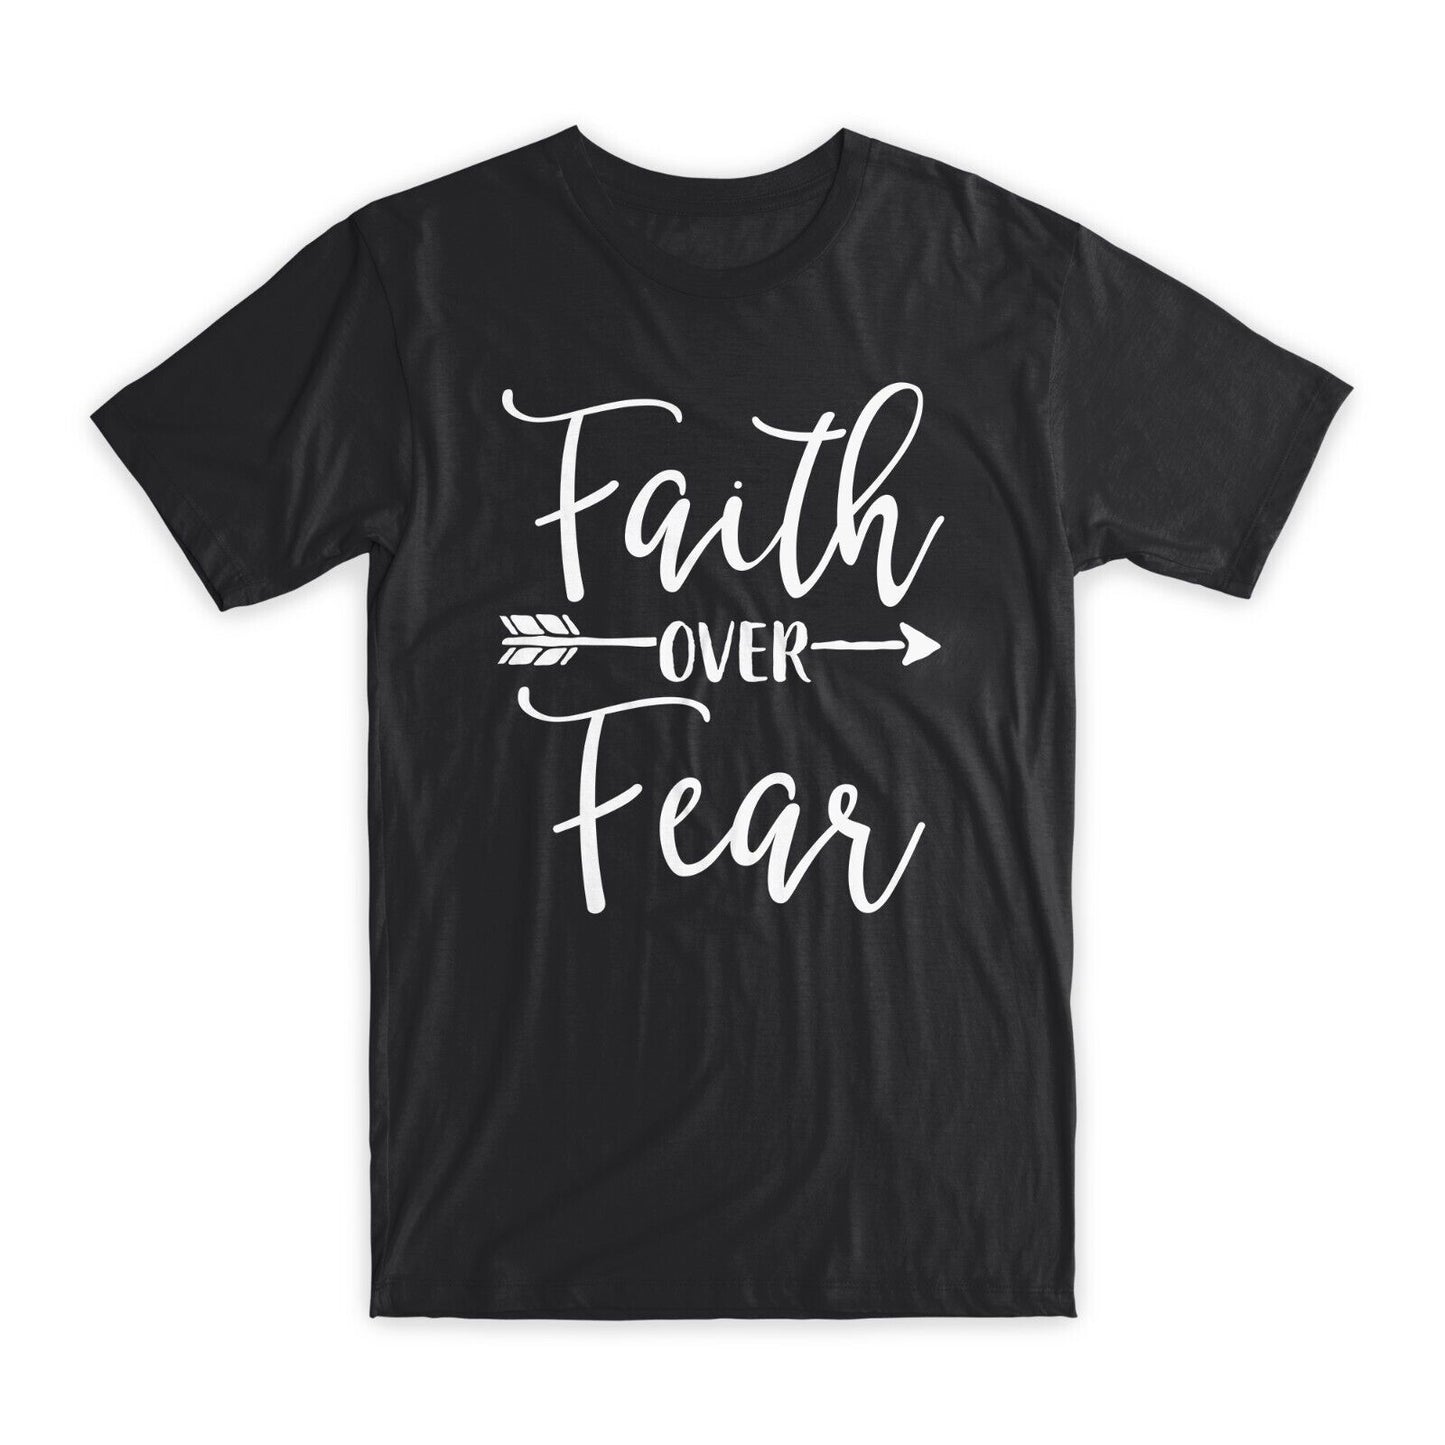 Faith Over Fear T-Shirt Premium Soft Cotton Crew Neck Funny Tee Novelty Gift NEW